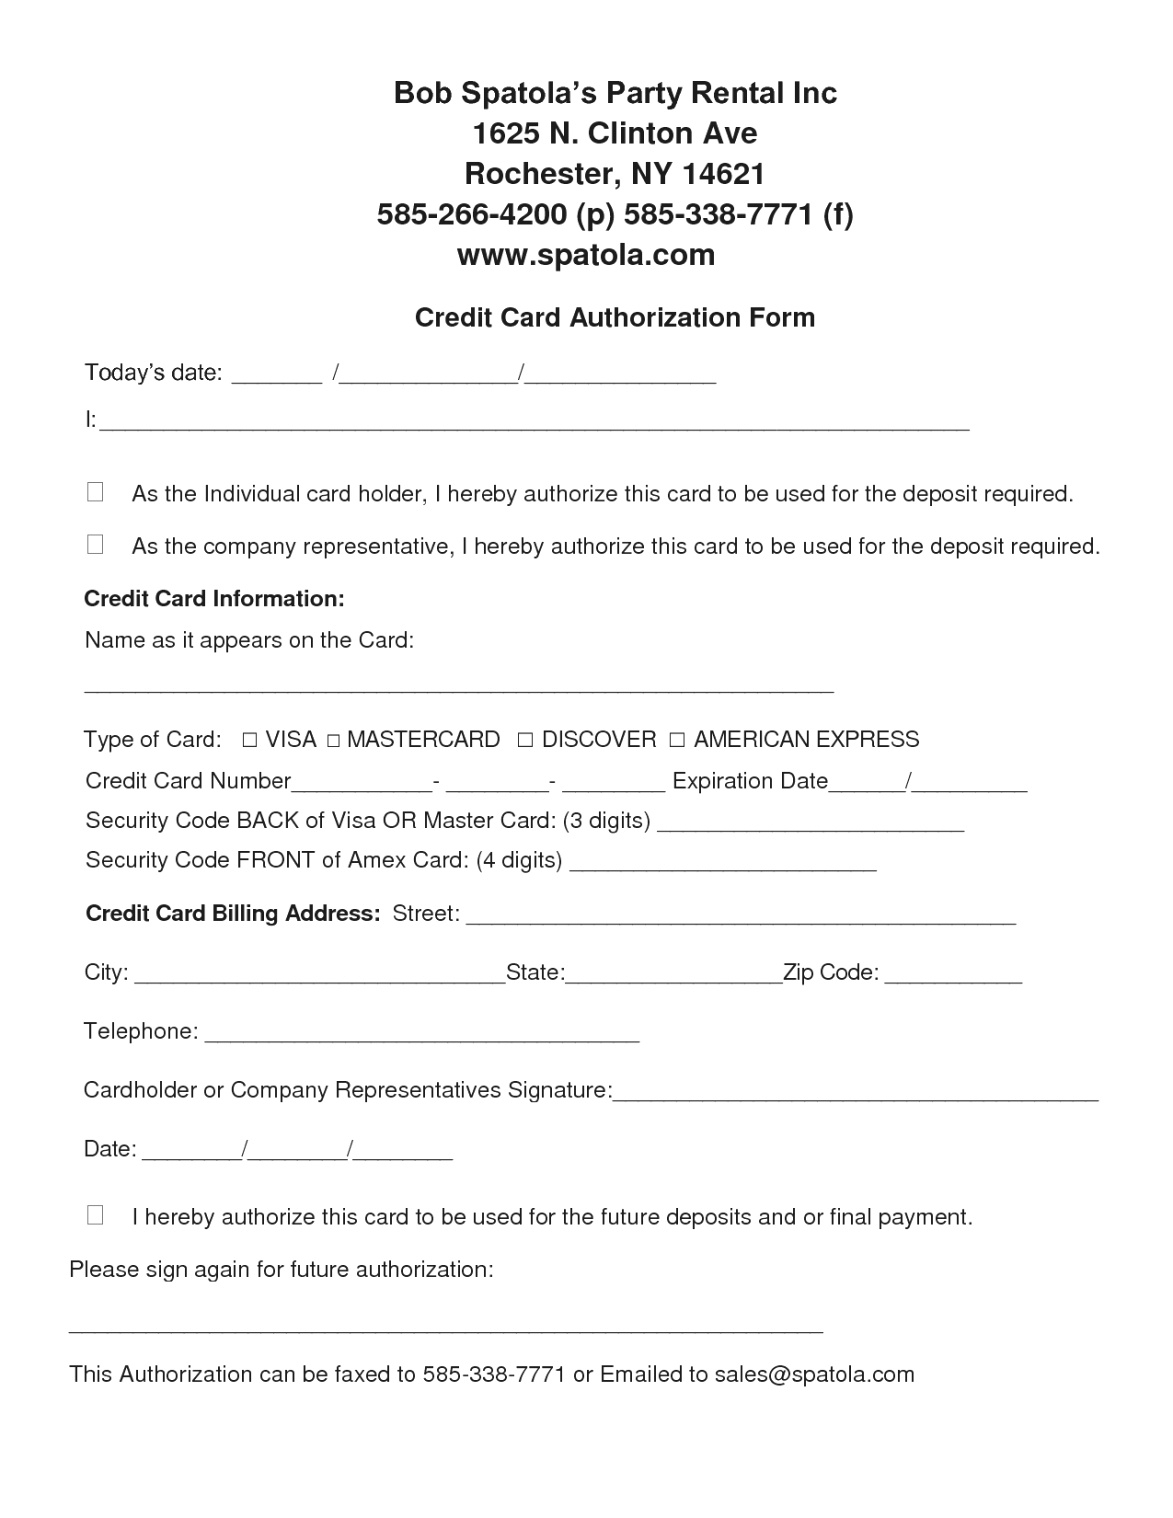 Authorization Form Template Example Mughals (Free Credit With Credit Card Authorization Form Template Word